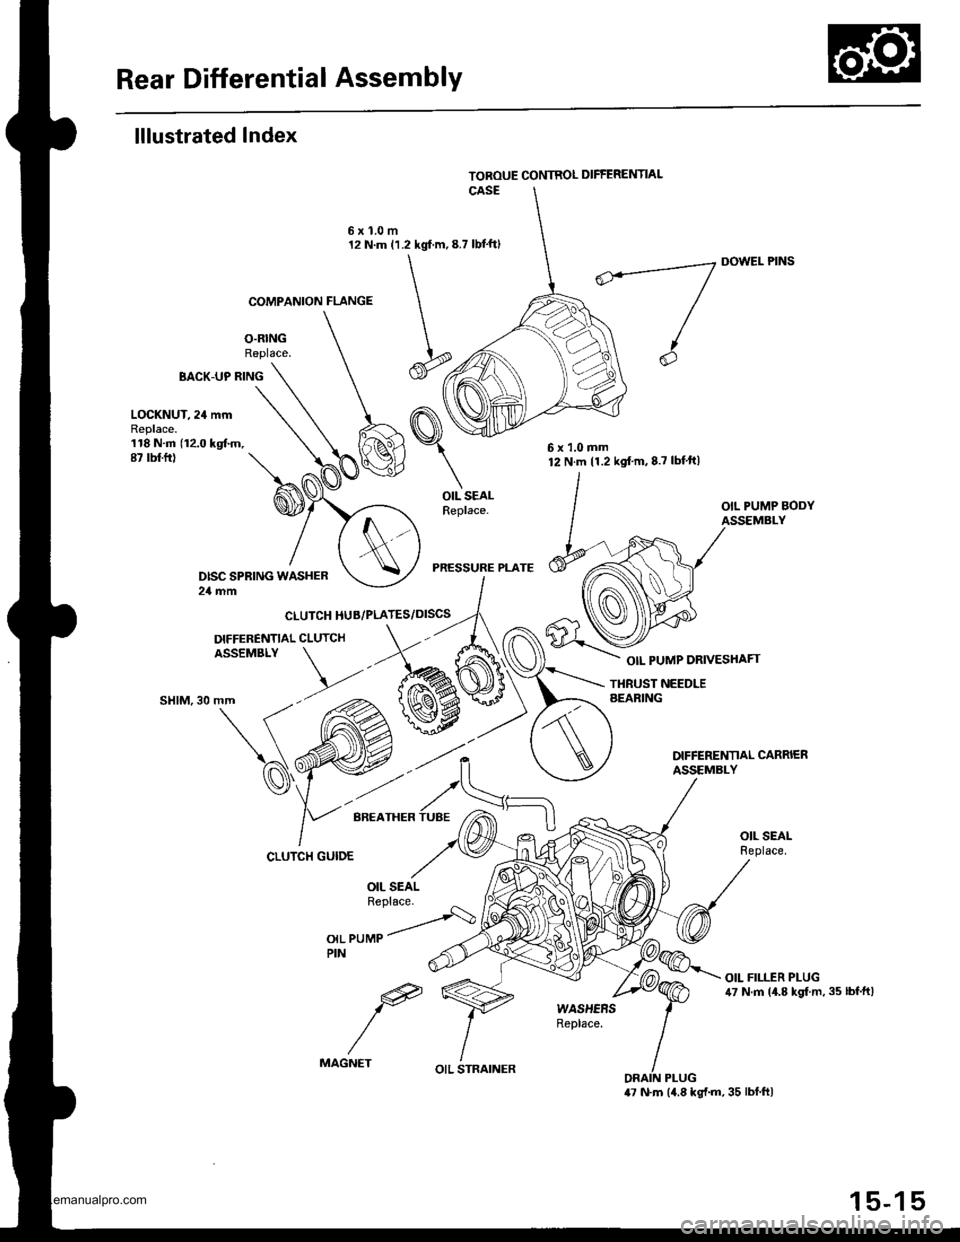 HONDA CR-V 1998 RD1-RD3 / 1.G Service Manual 
Rear Differential Assembly
lllustrated Index
O.RINGReplace.
6xl.0m12 N.m (1.2 kgf m,8.7 lbtftl
BACK-UP RING
COMPANION FLANGE
CLUTCH HUB/PLATES/DISCS
DIFFERENNAL CLUTCHASSEMBLY
DOWEL PINS
OIL PUMP DR